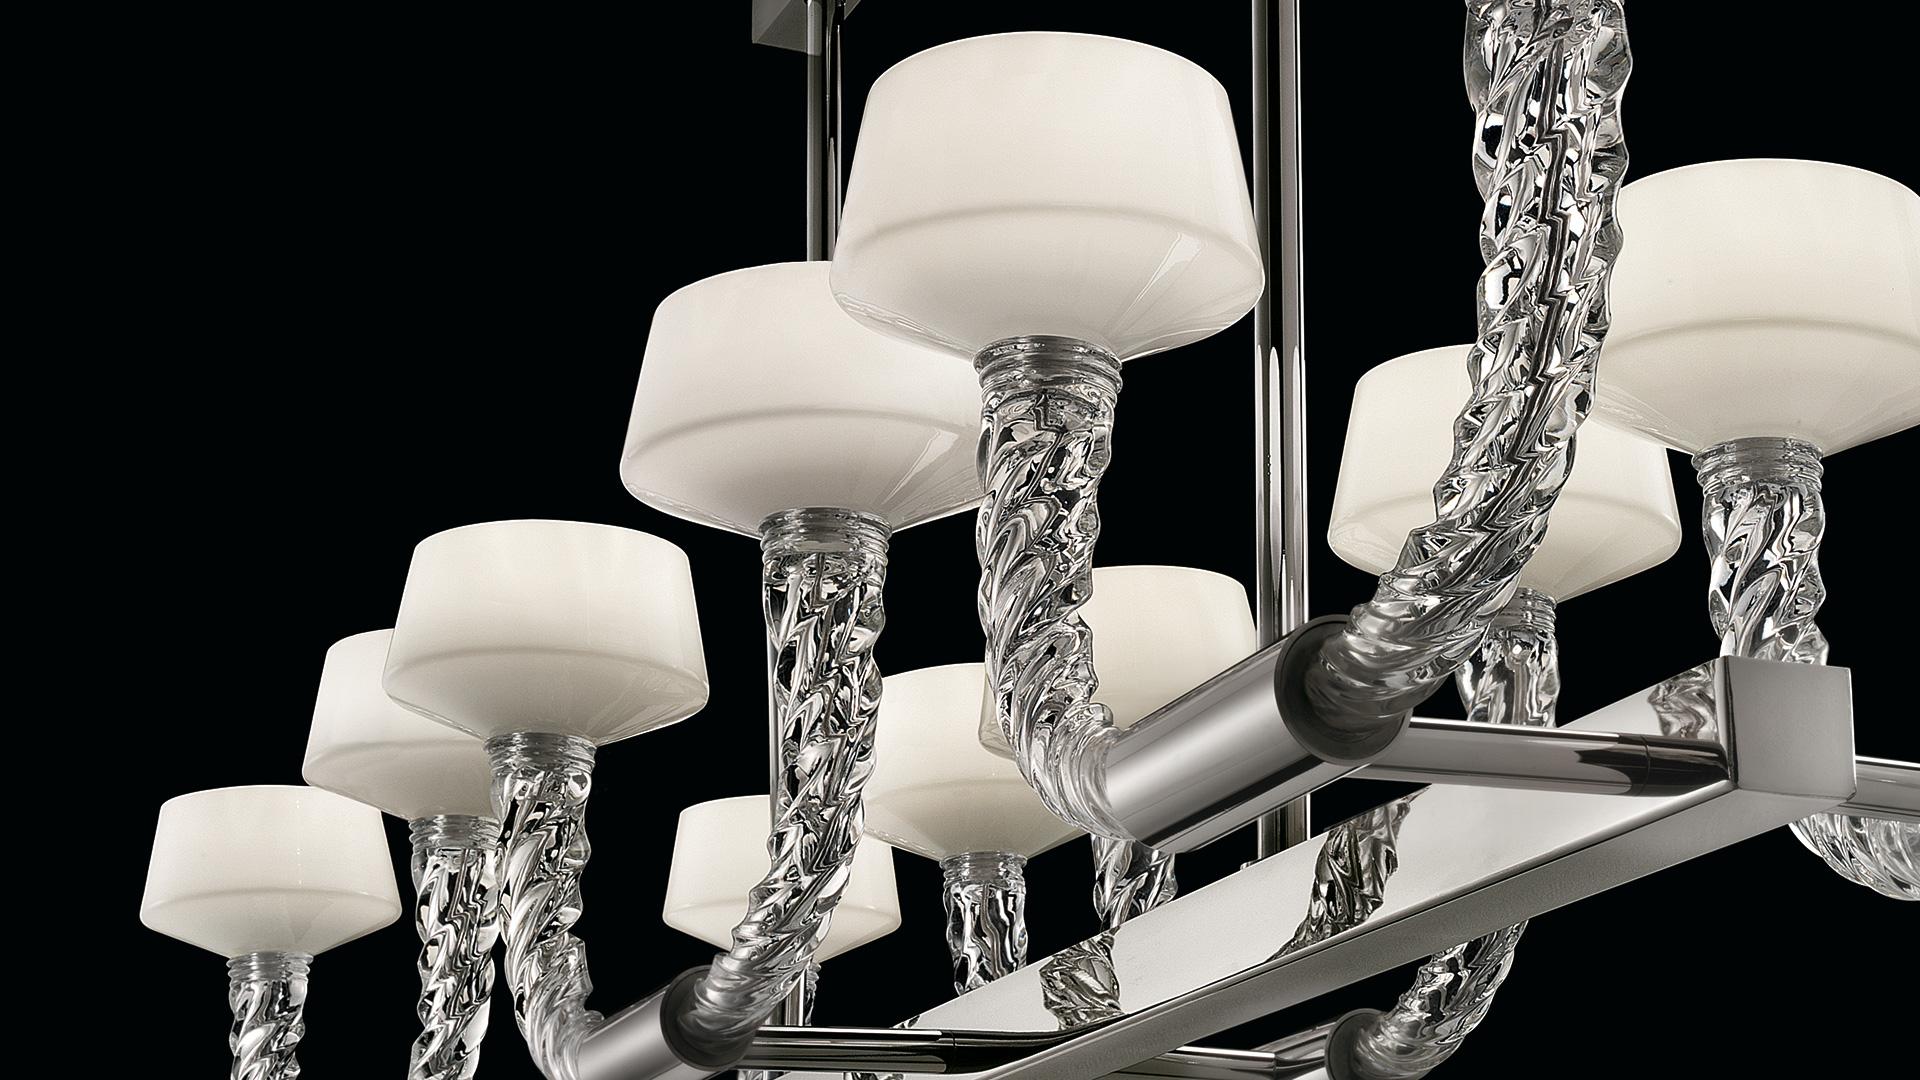 Polished Twins 7226 12 Chandelier in Glass with Chrome Finishing, by Barovier&Toso